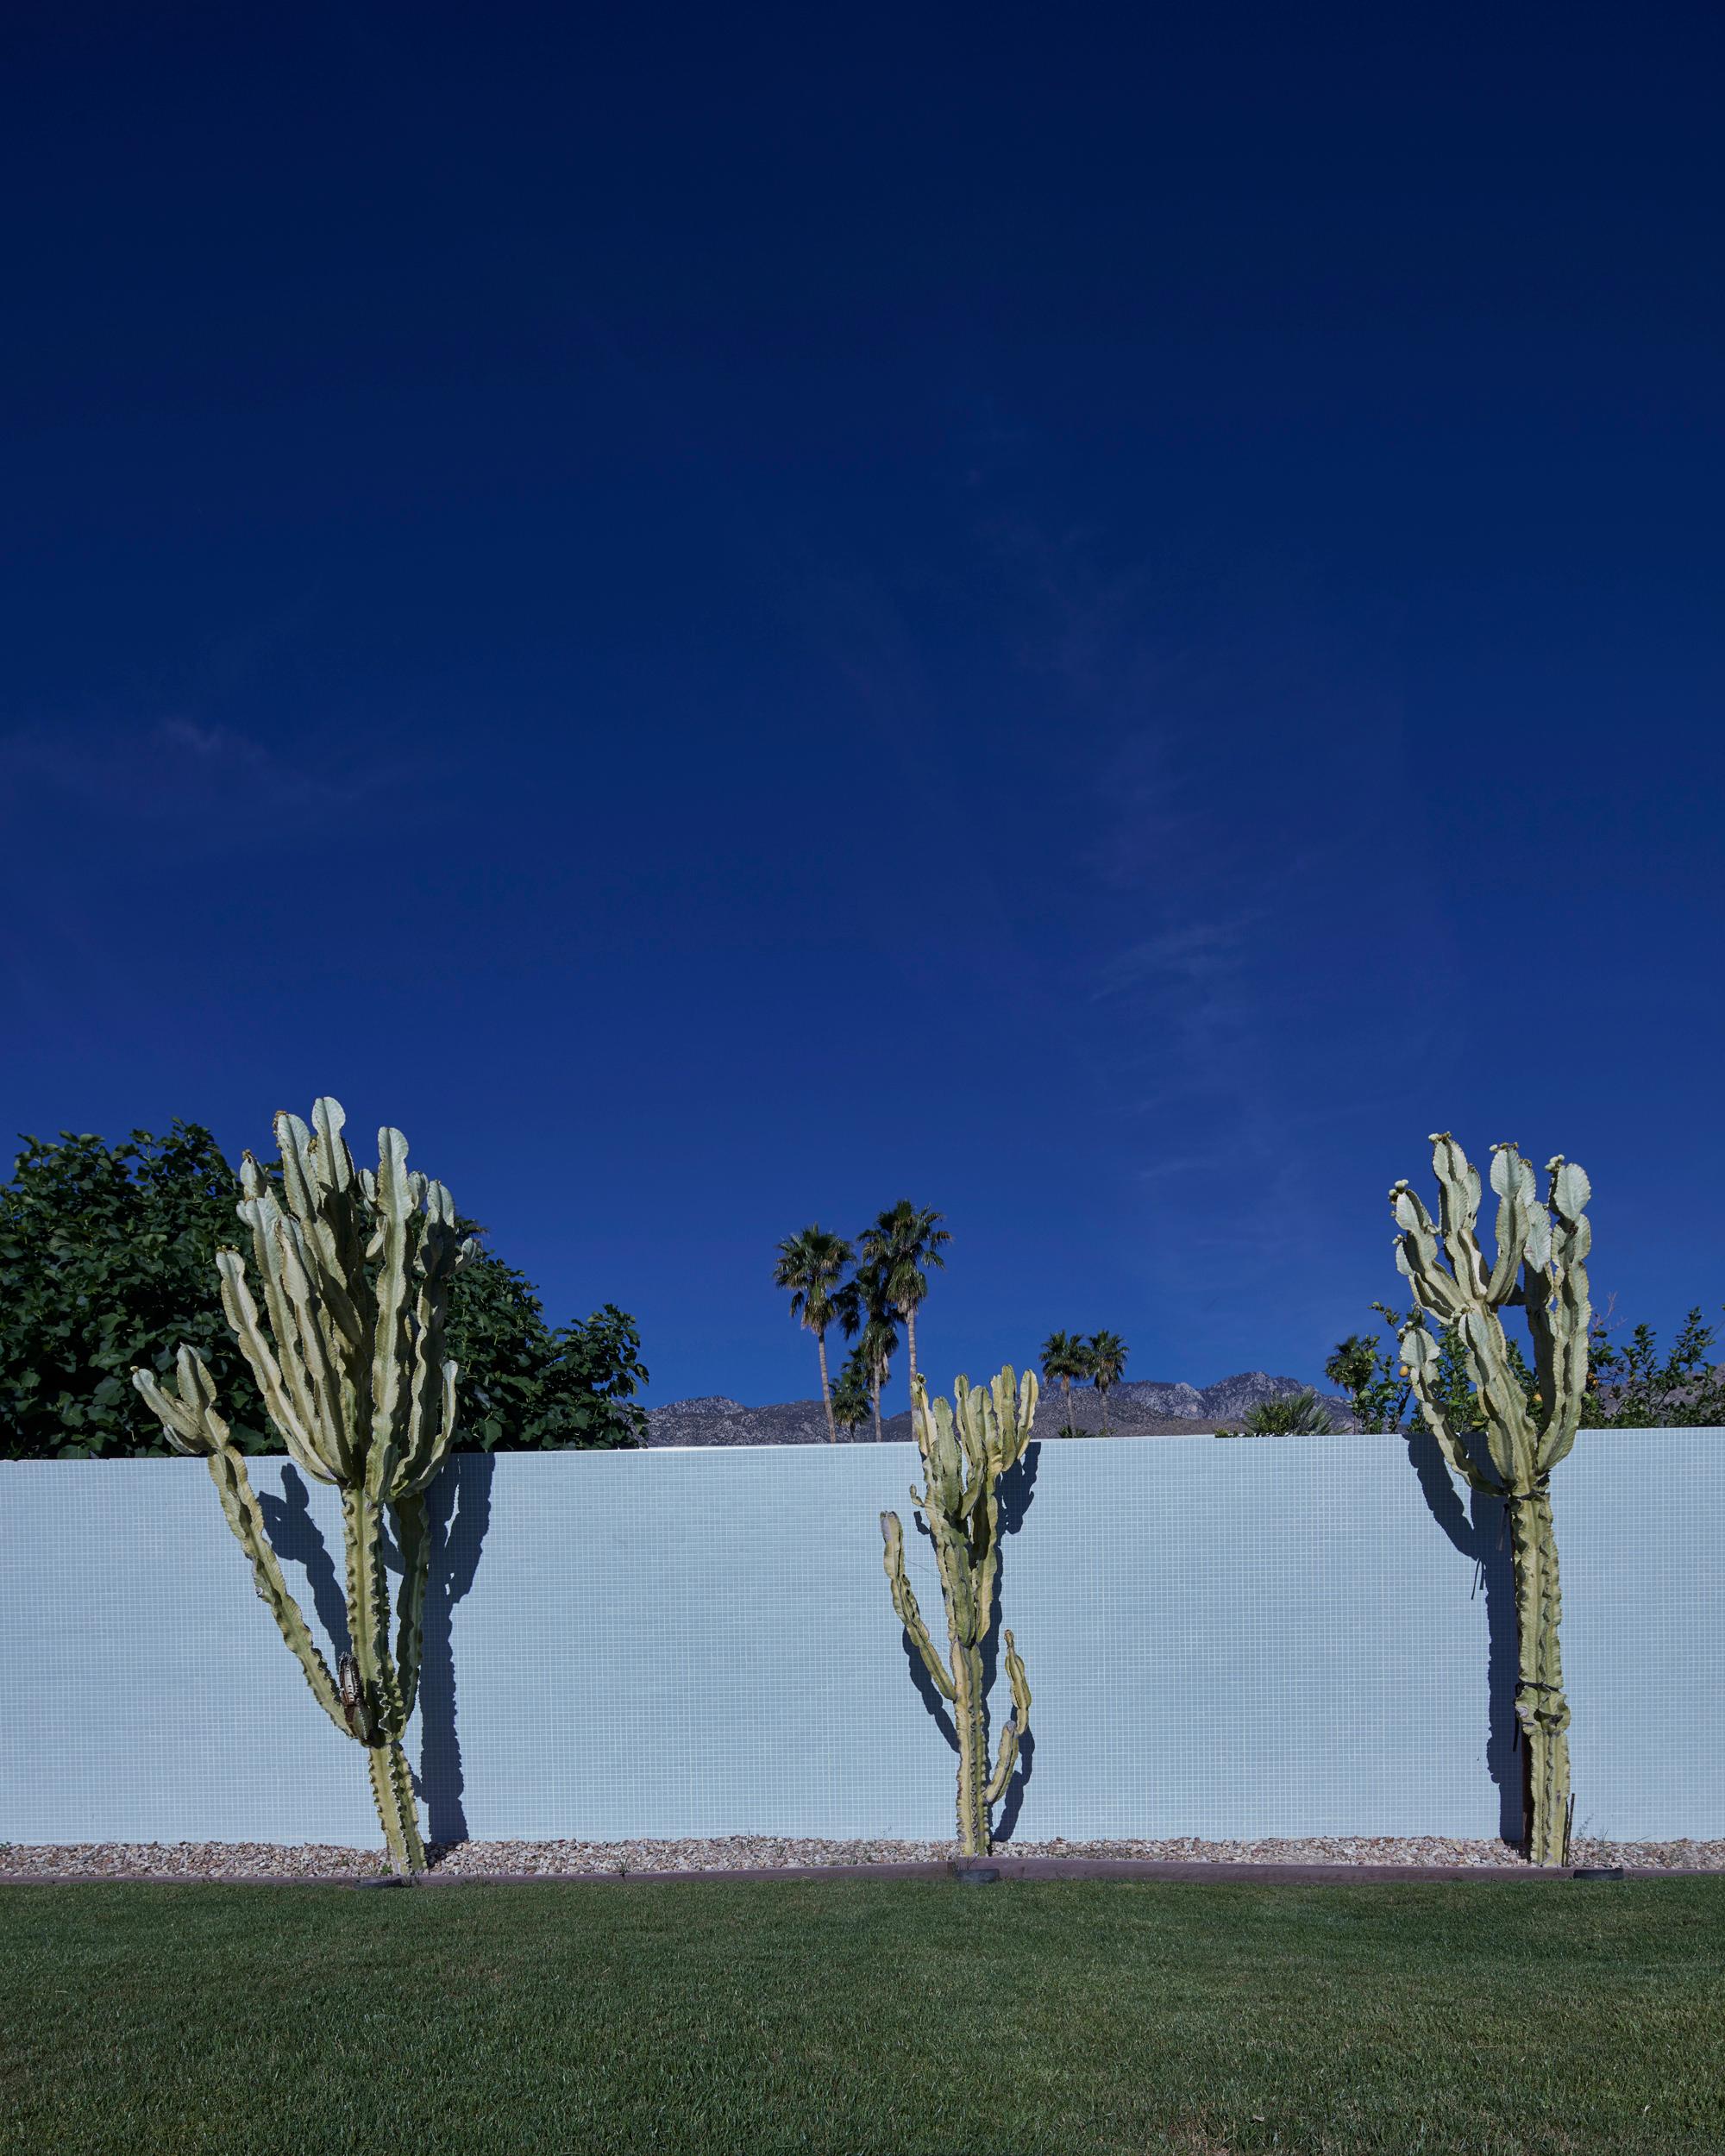 Frank Schott Color Photograph - Palm Springs ( Cactus ) - a study of iconic mid century desert architecture